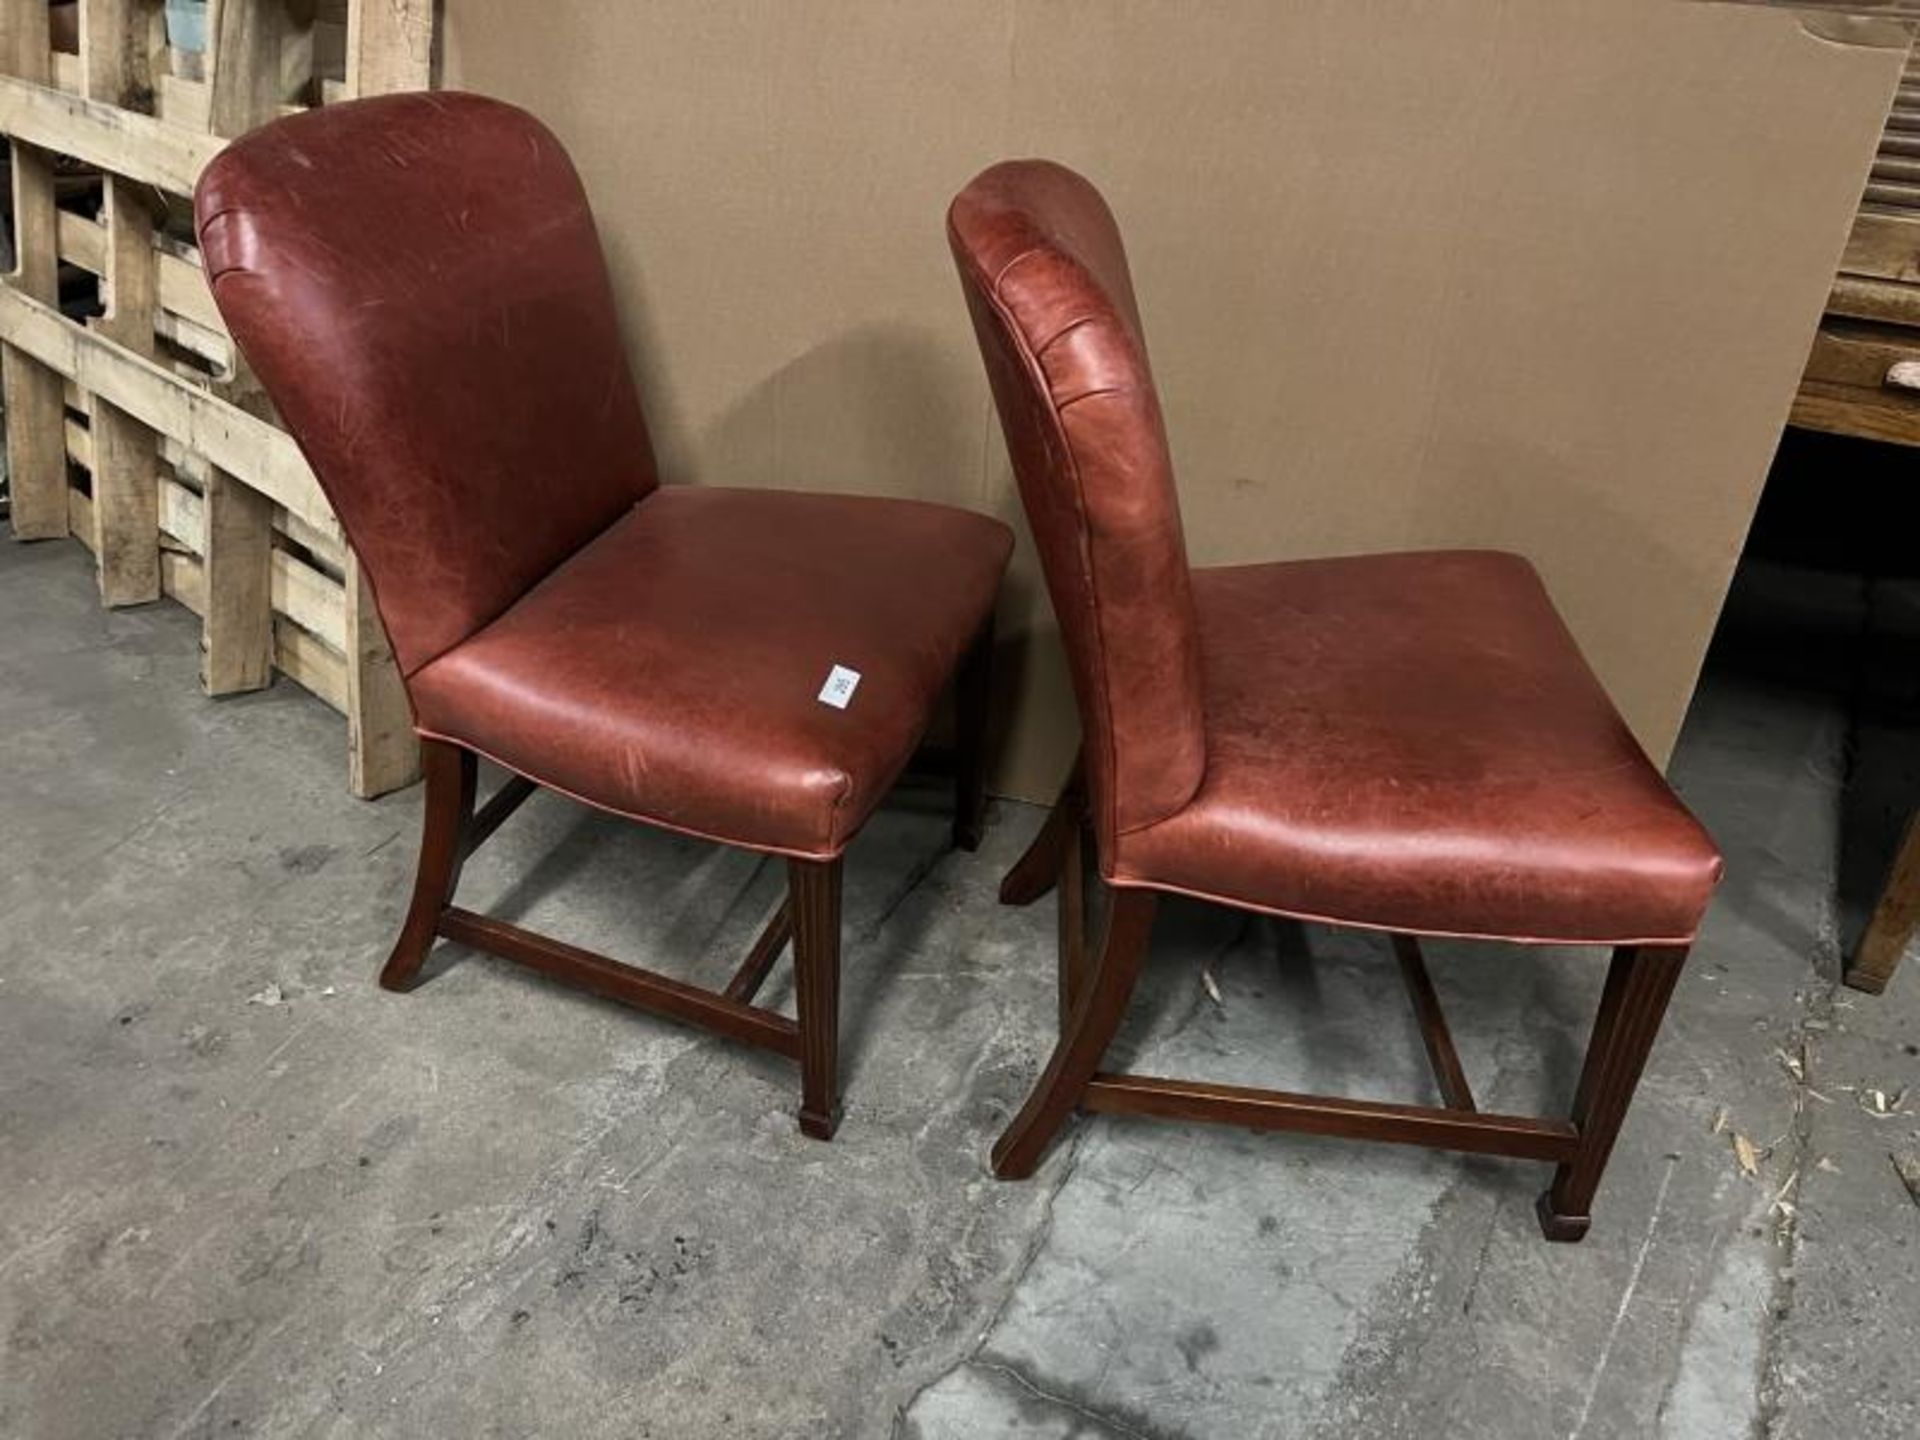 Pair of Red Vinyl Chairs; Located in Mill Building - Image 18 of 20